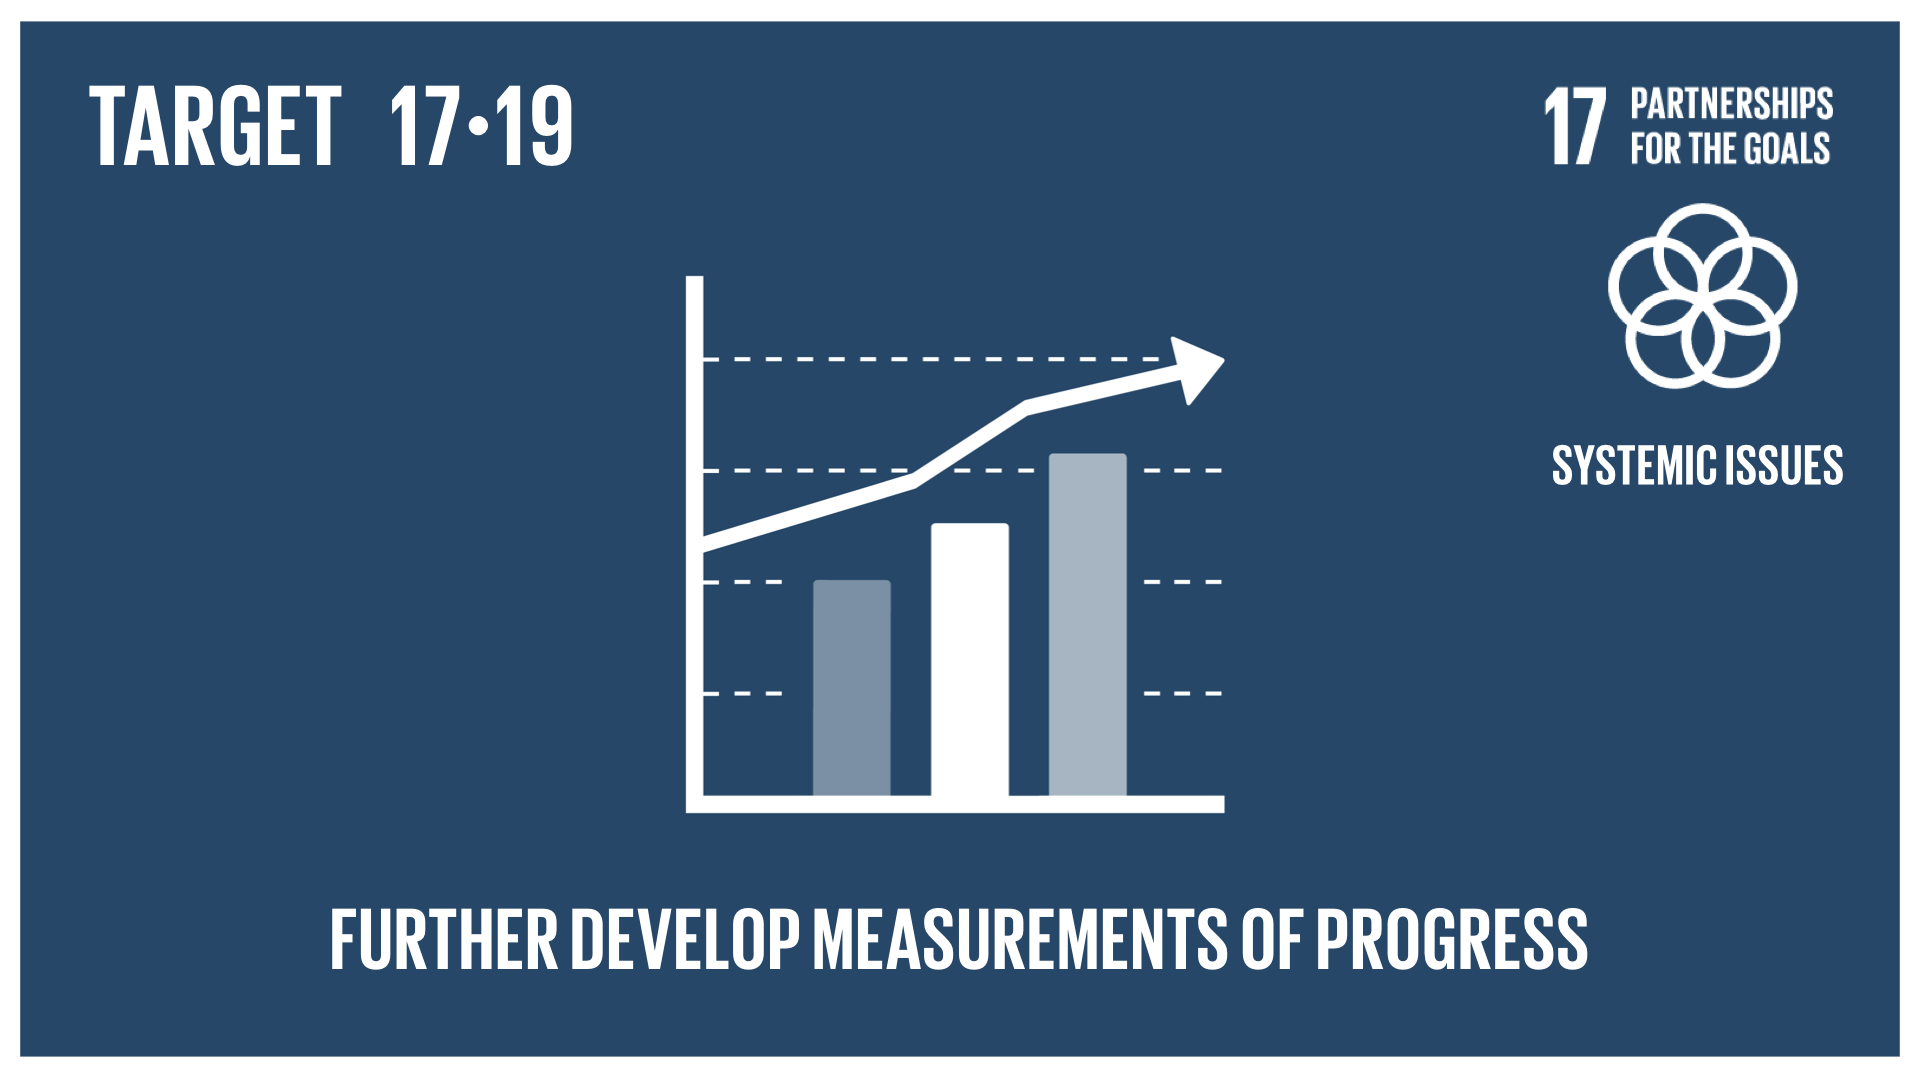 Graphic displaying the development of further measures of progress